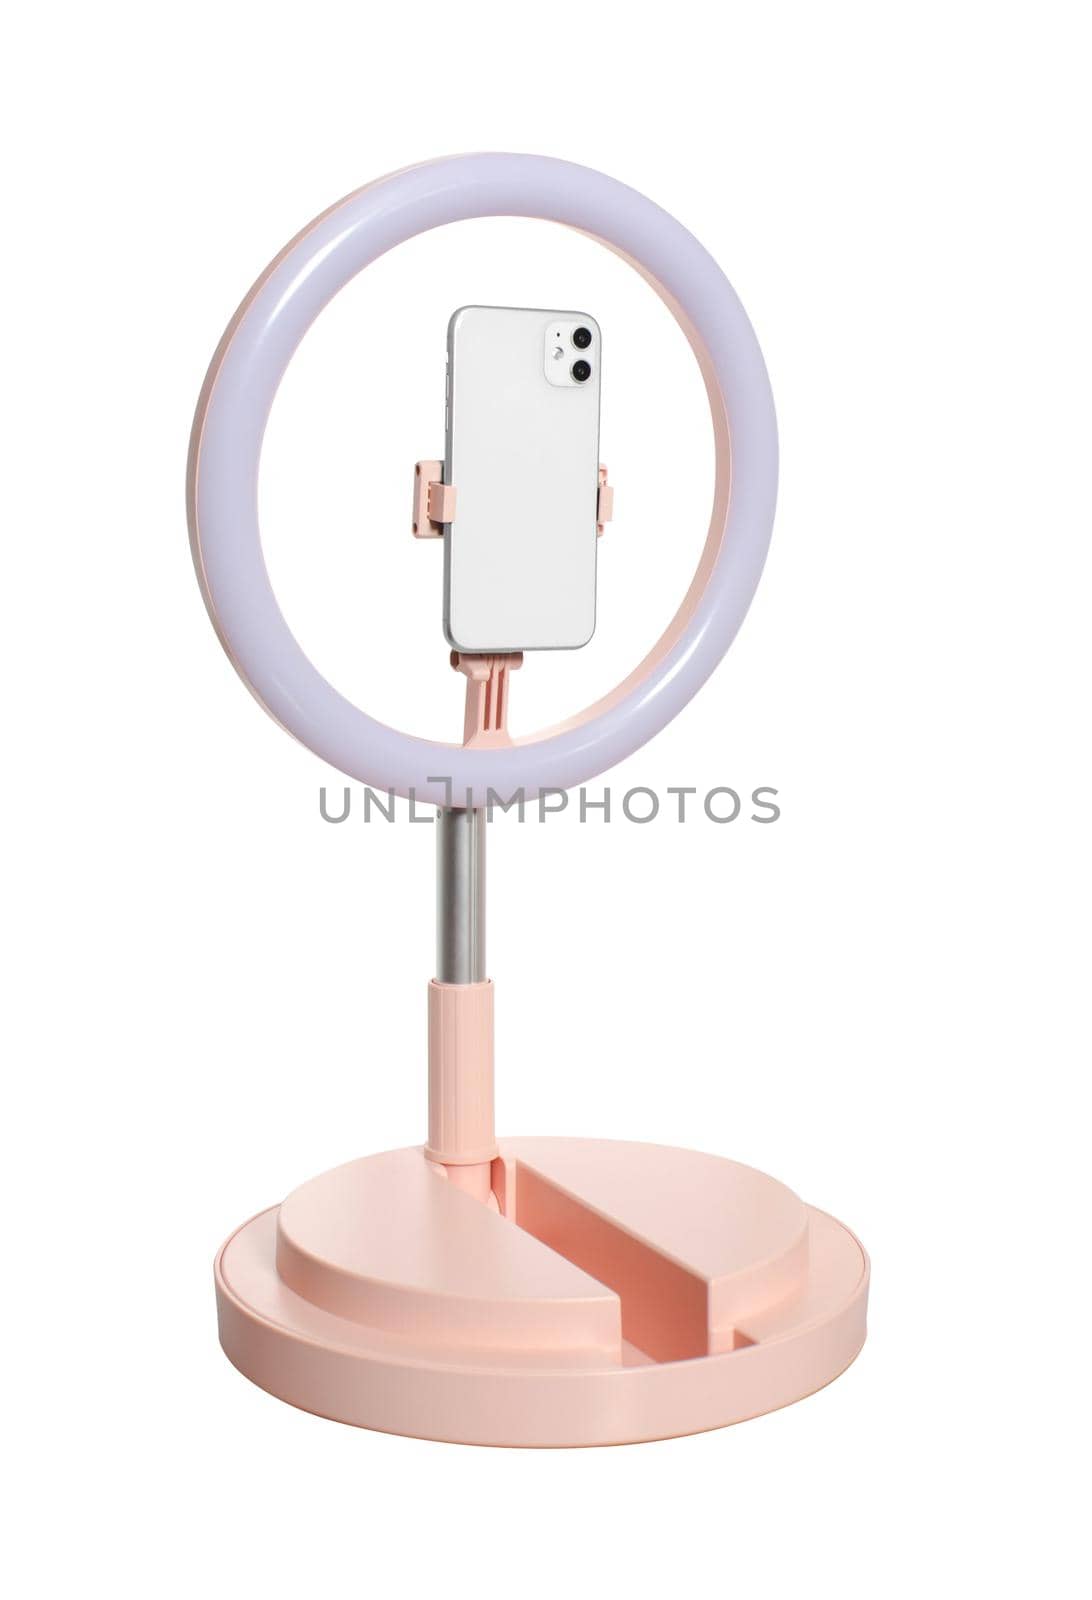 selfie ring lamp with smartphone holder, on stand, isolated on white background